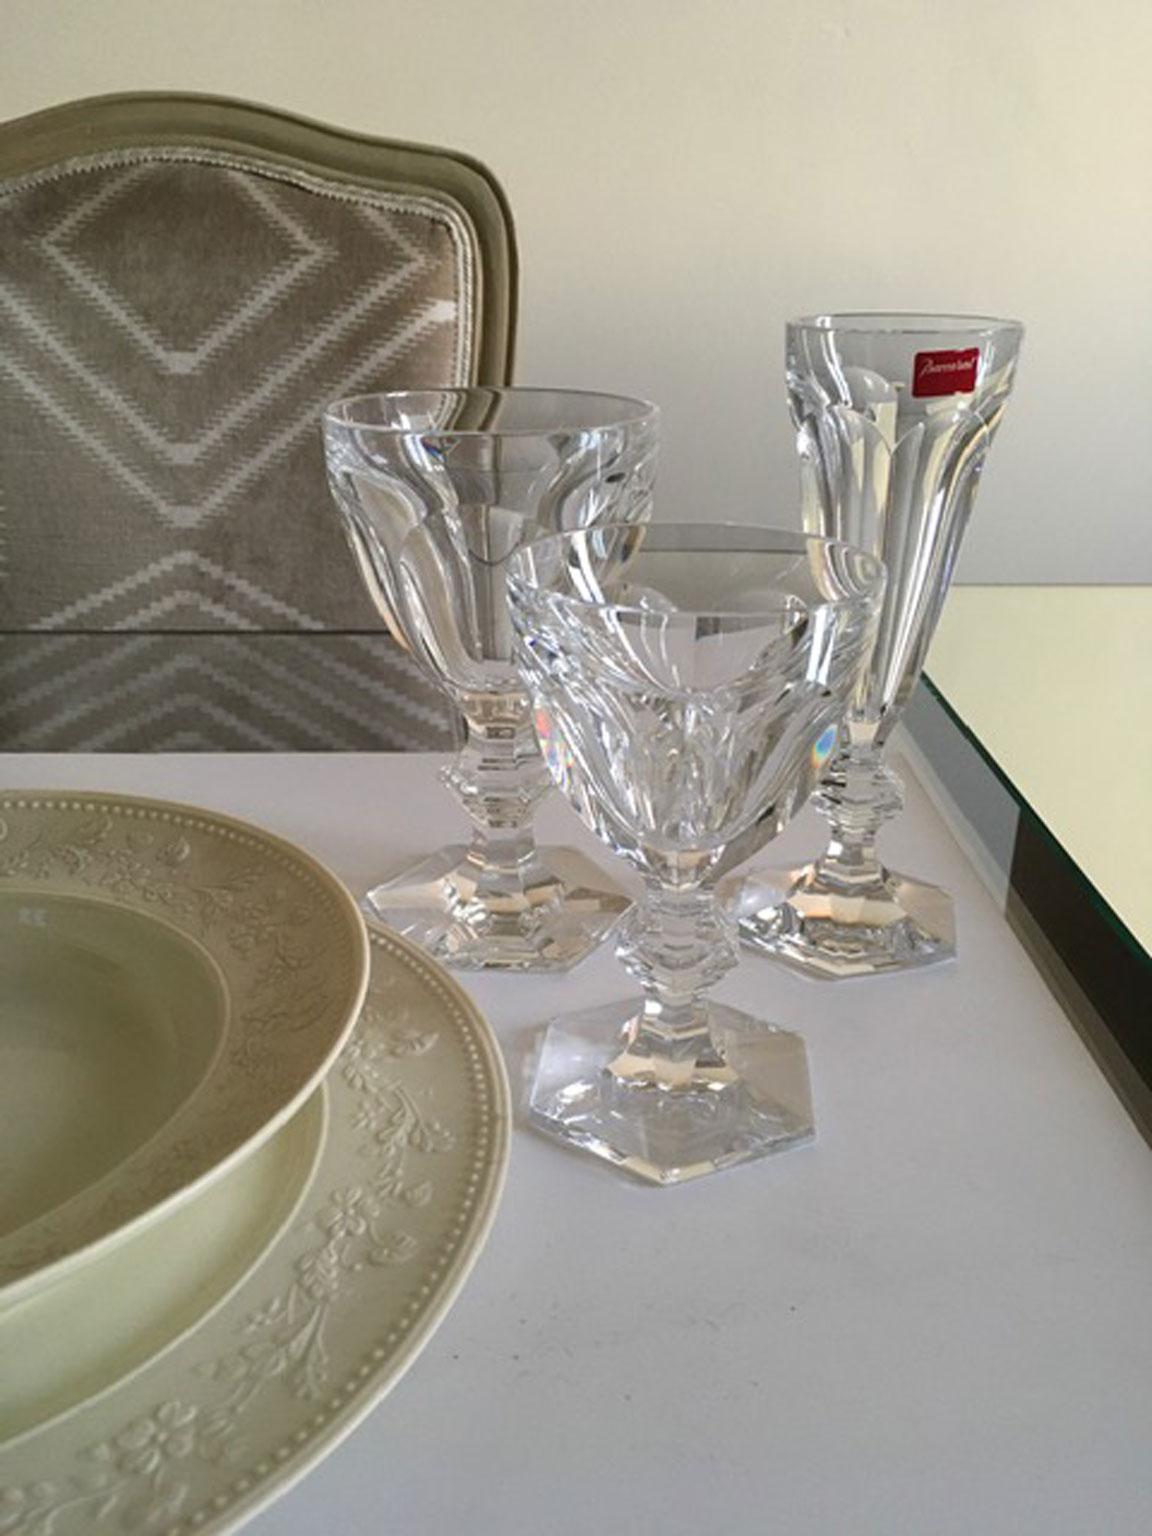 The Harcourt collection, one of the first model produced and presents in Baccarat archive, is reputed for its iconic design.
Created in 1841, Harcourt stemware has been chosen and bought from all over the world. The Harcourt  1841, collection has